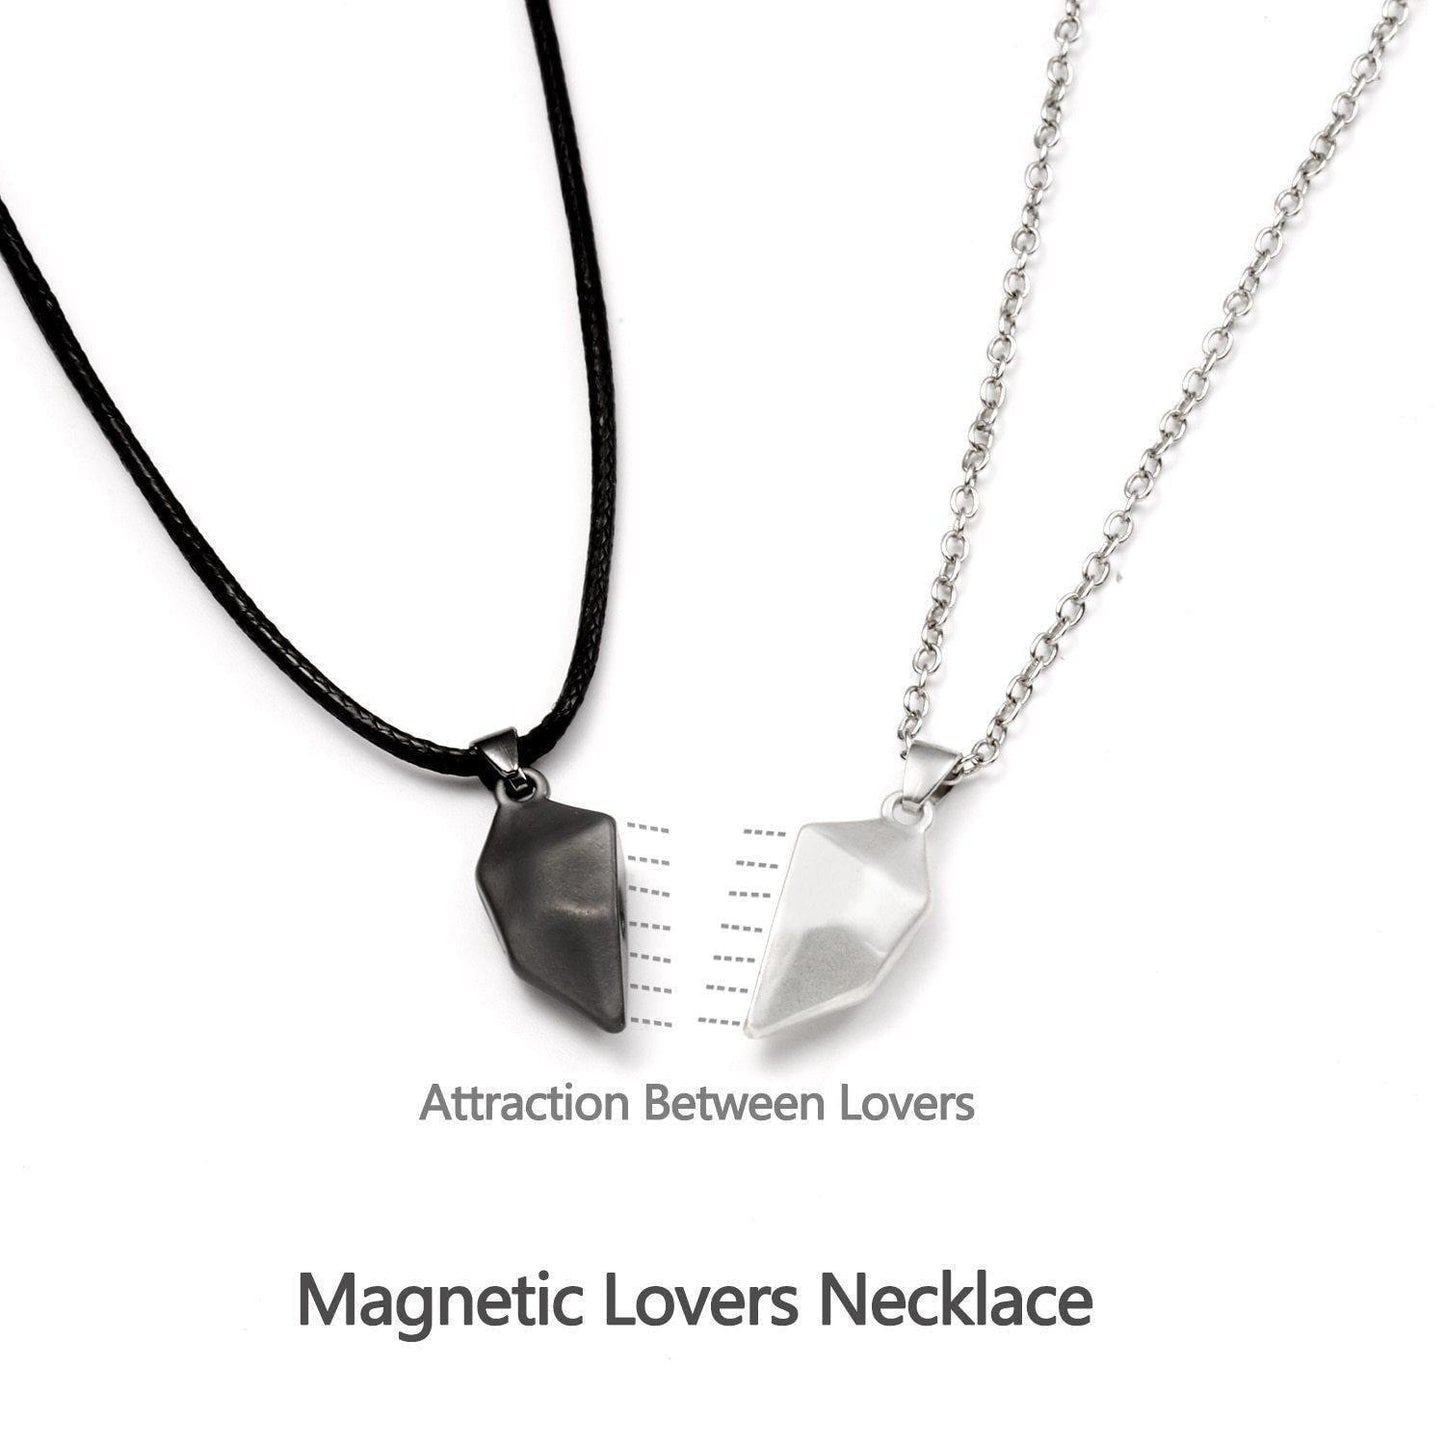 Magnetic Best Friend Necklace For 2 in 2023 | Magnetic Best Friend Necklace For 2 - undefined | best friend necklace for 2, best friend necklaces magnetic, Friendship Pendant Necklaces, gift ideas for Best Friends, Magnetic Friendship necklace, Magnetic heart Necklace, To My Best Friend Friendship Gift Necklace Set | From Hunny Life | hunnylife.com